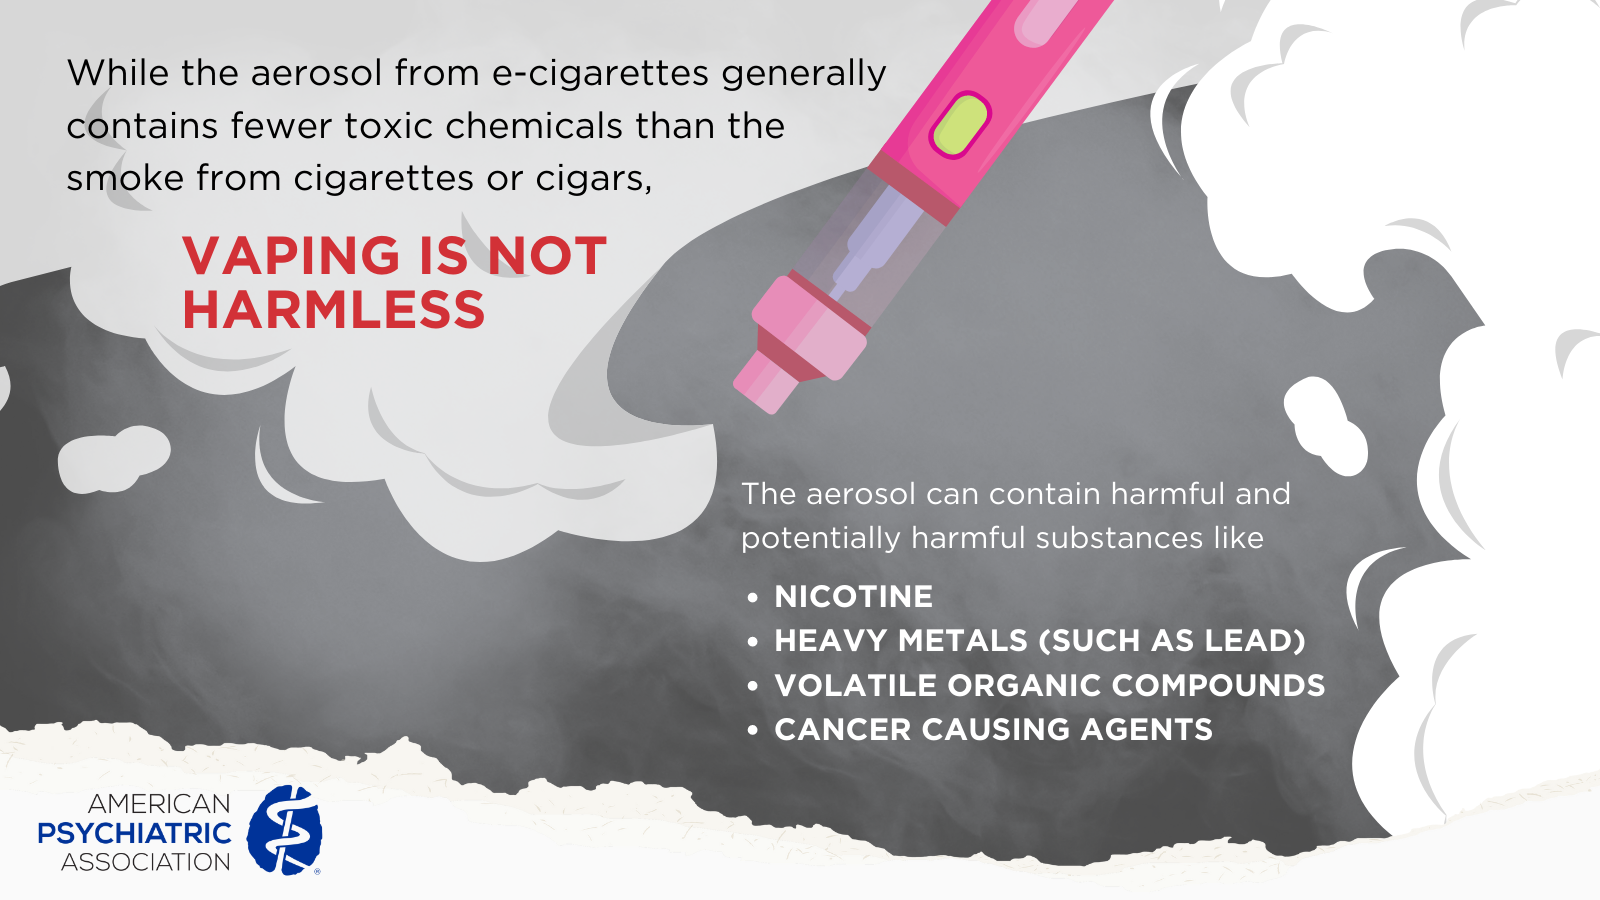 Vaping is not harmless - The aerosol from e-cigarettes generally contains fewer toxic chemical than the smoke from cigarettes or cigars, it is not harmless. It can contain potentially harmful substances like nicotine, heavy metals, volatile compounds, and cancer-causing agents.